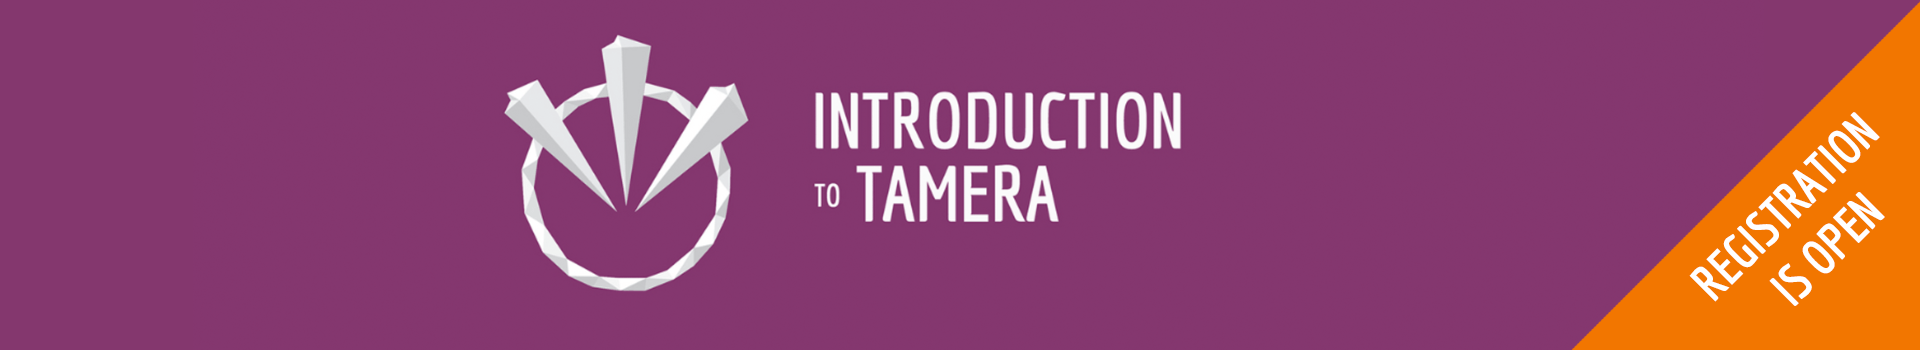 intro to Tamera banner online course registration open